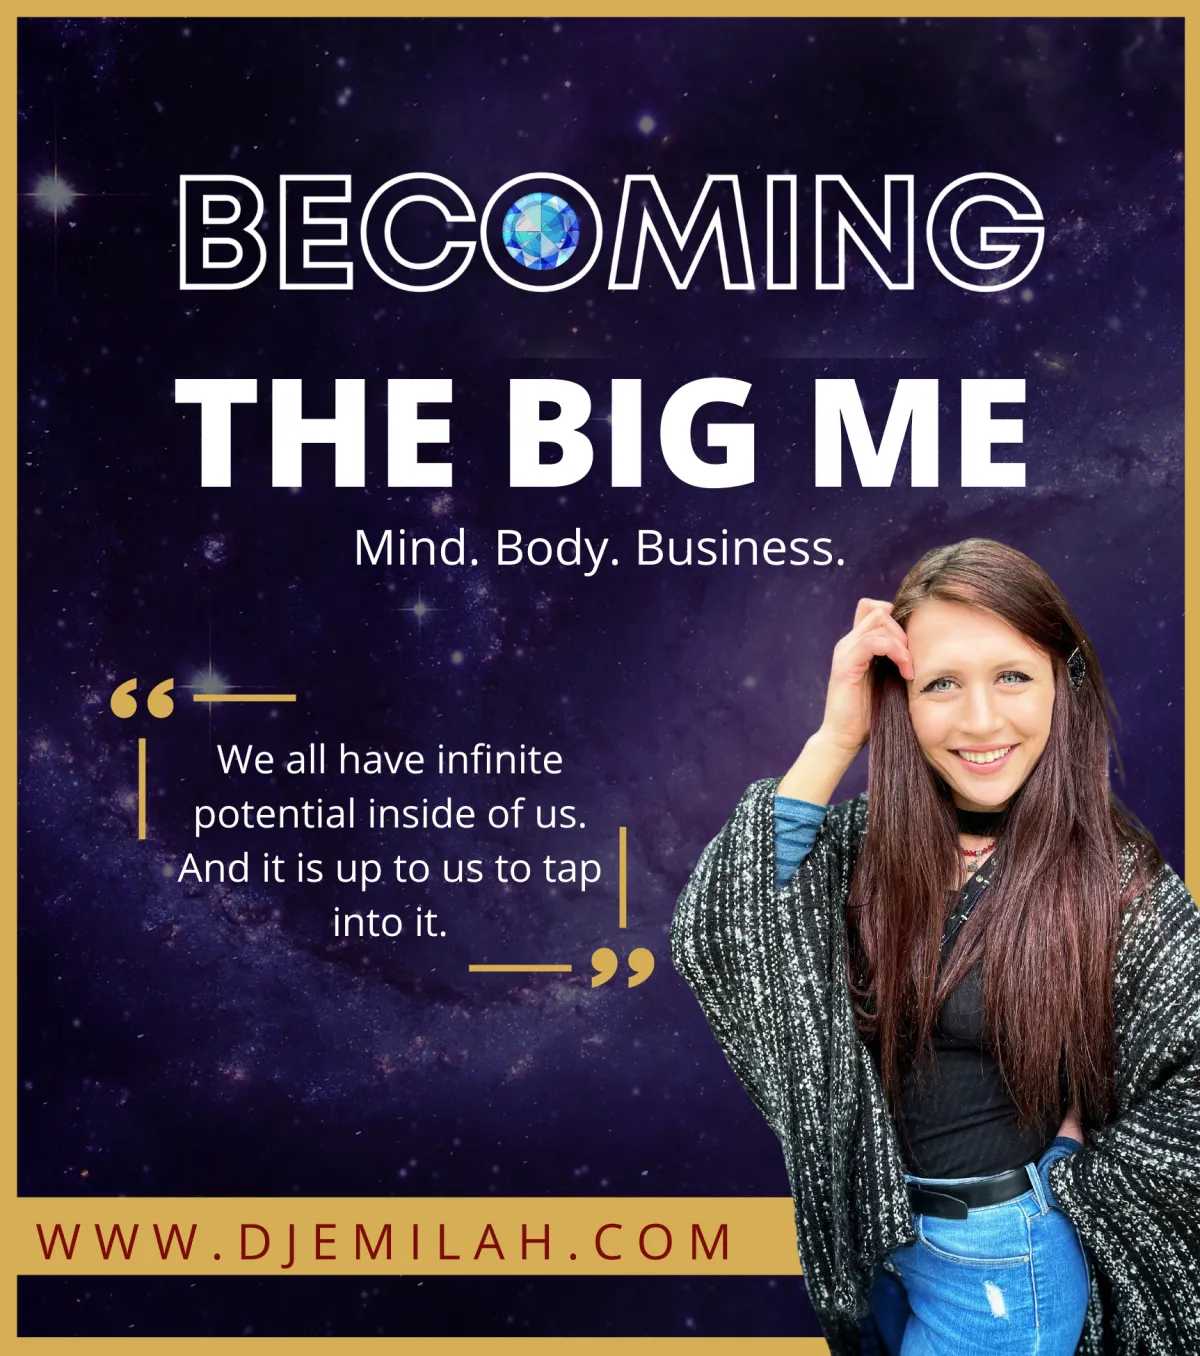 Becoming the Big Me: The Great Conquest | Djemilah Birnie | Becoming the Big Me